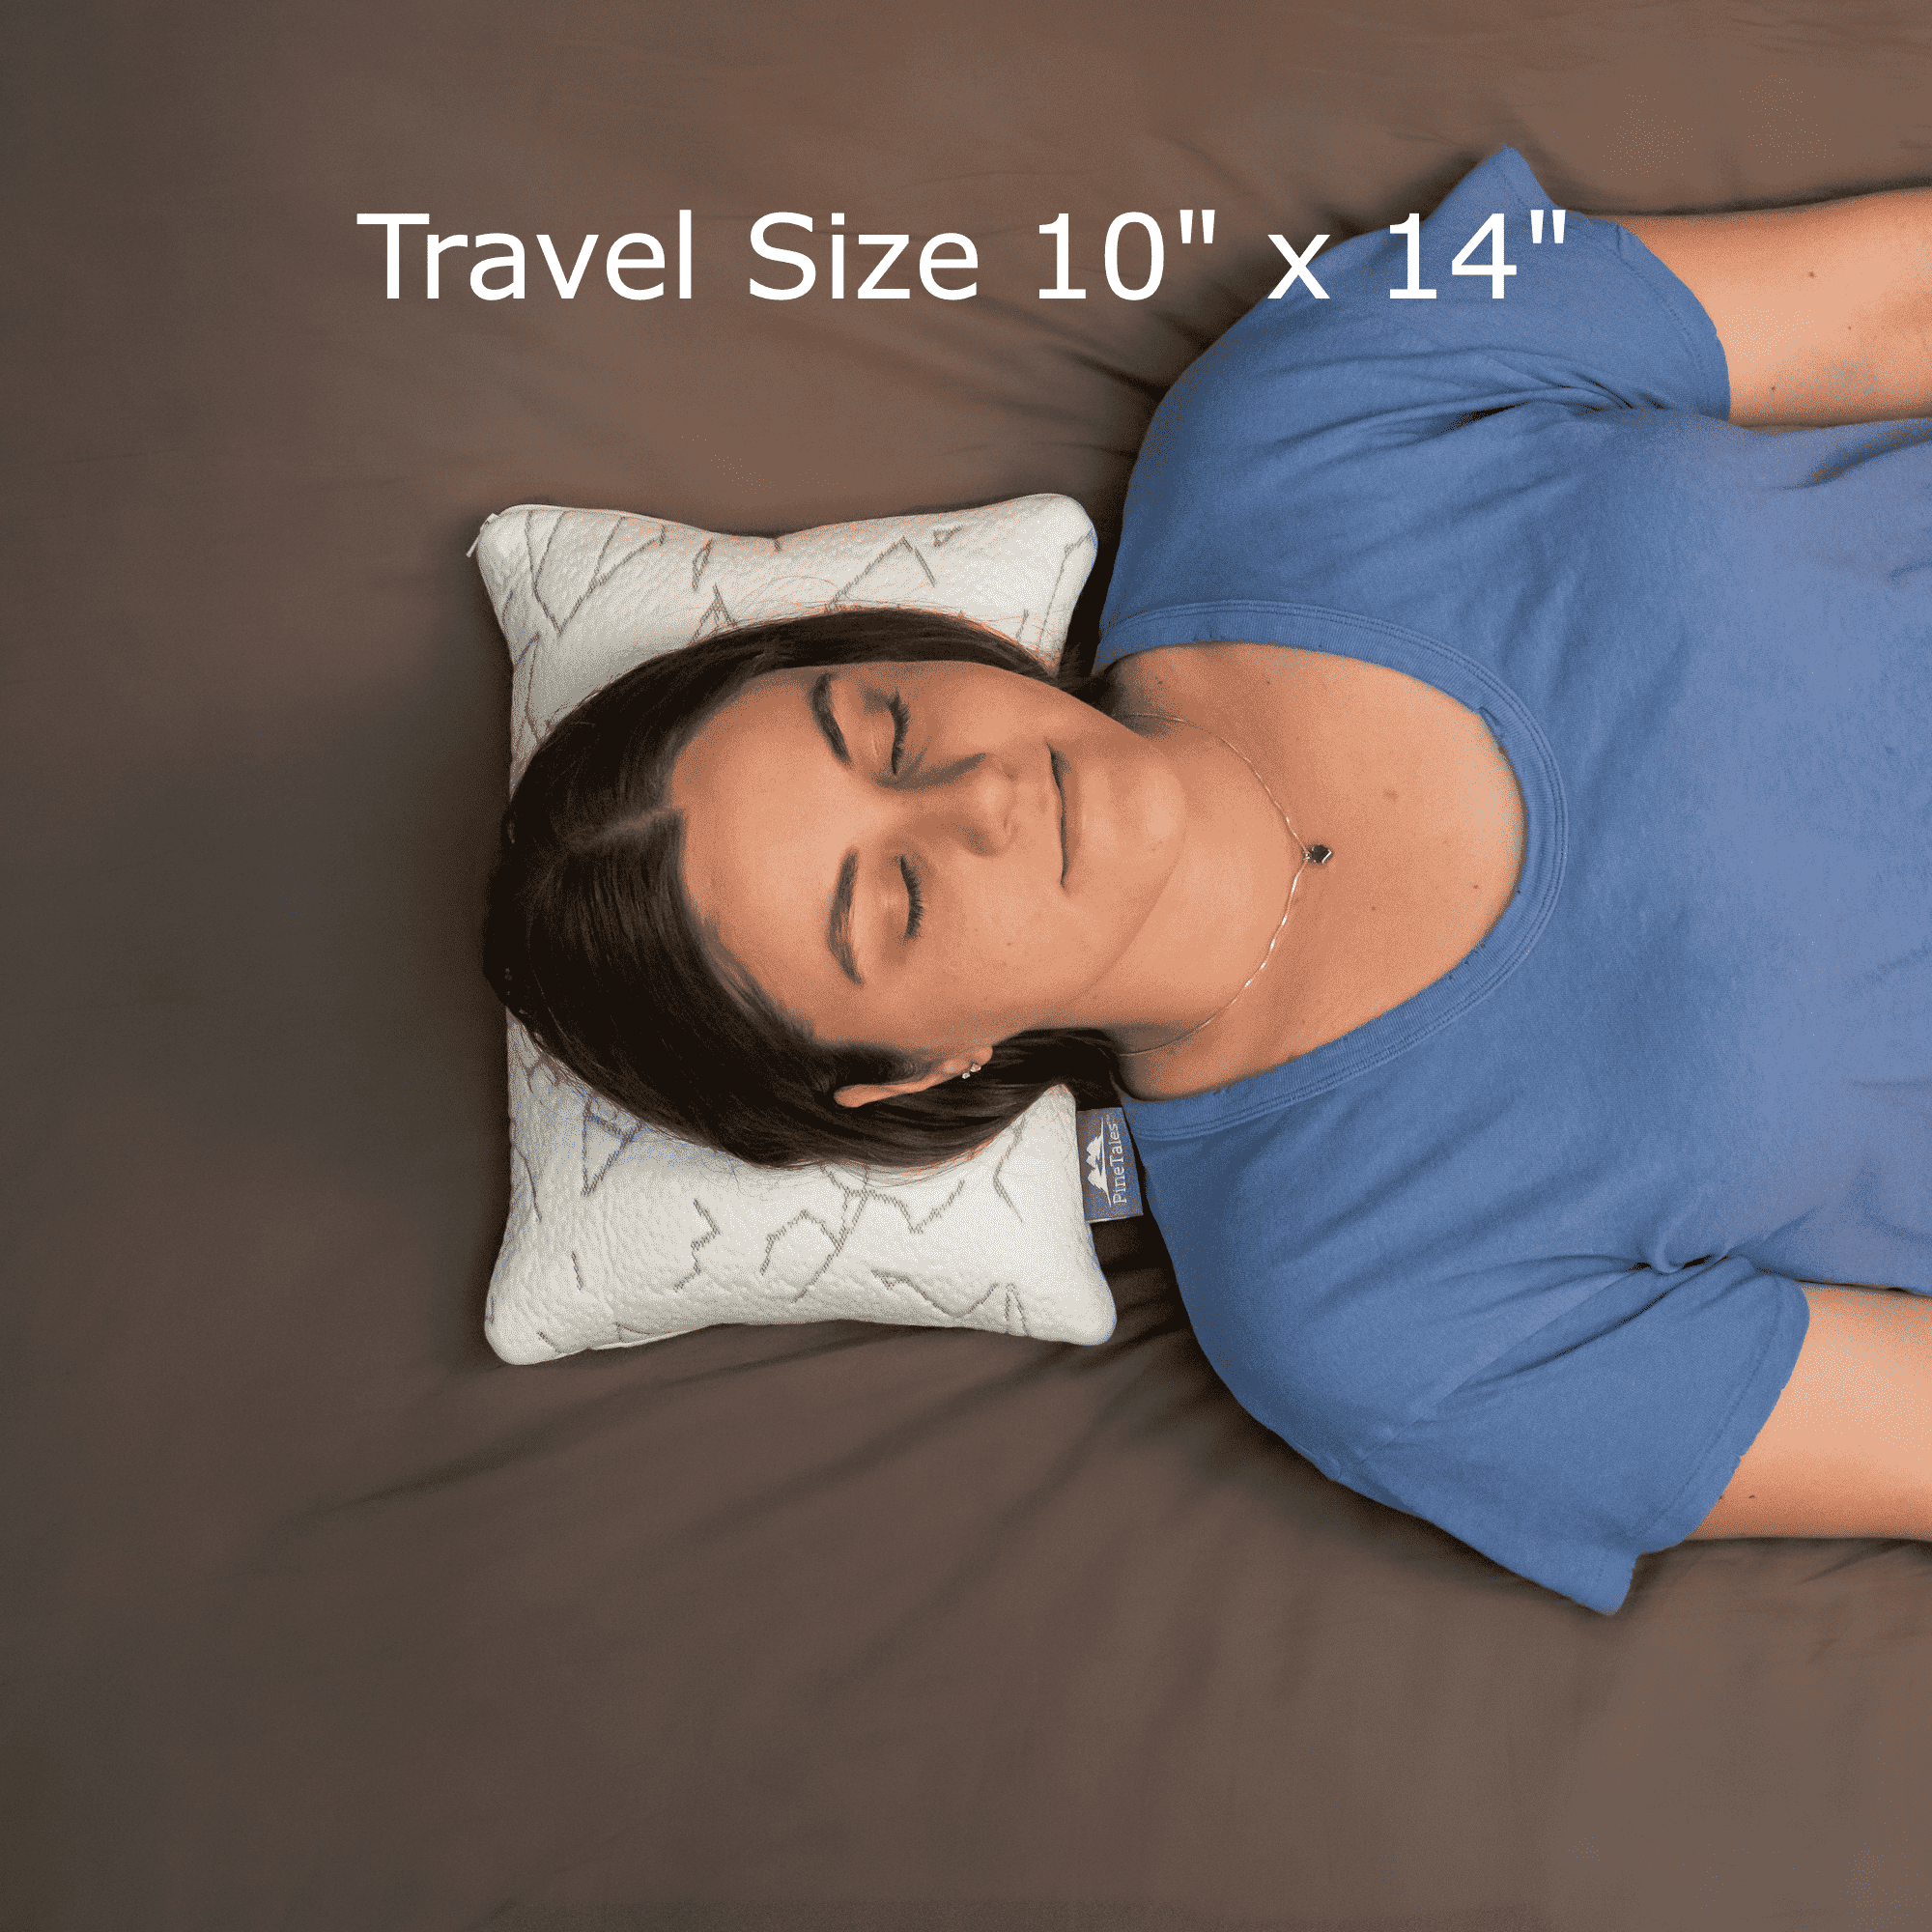 Buckwheat Pillow Size Guide - Travel Size 10 inches x 14 inches - Woman